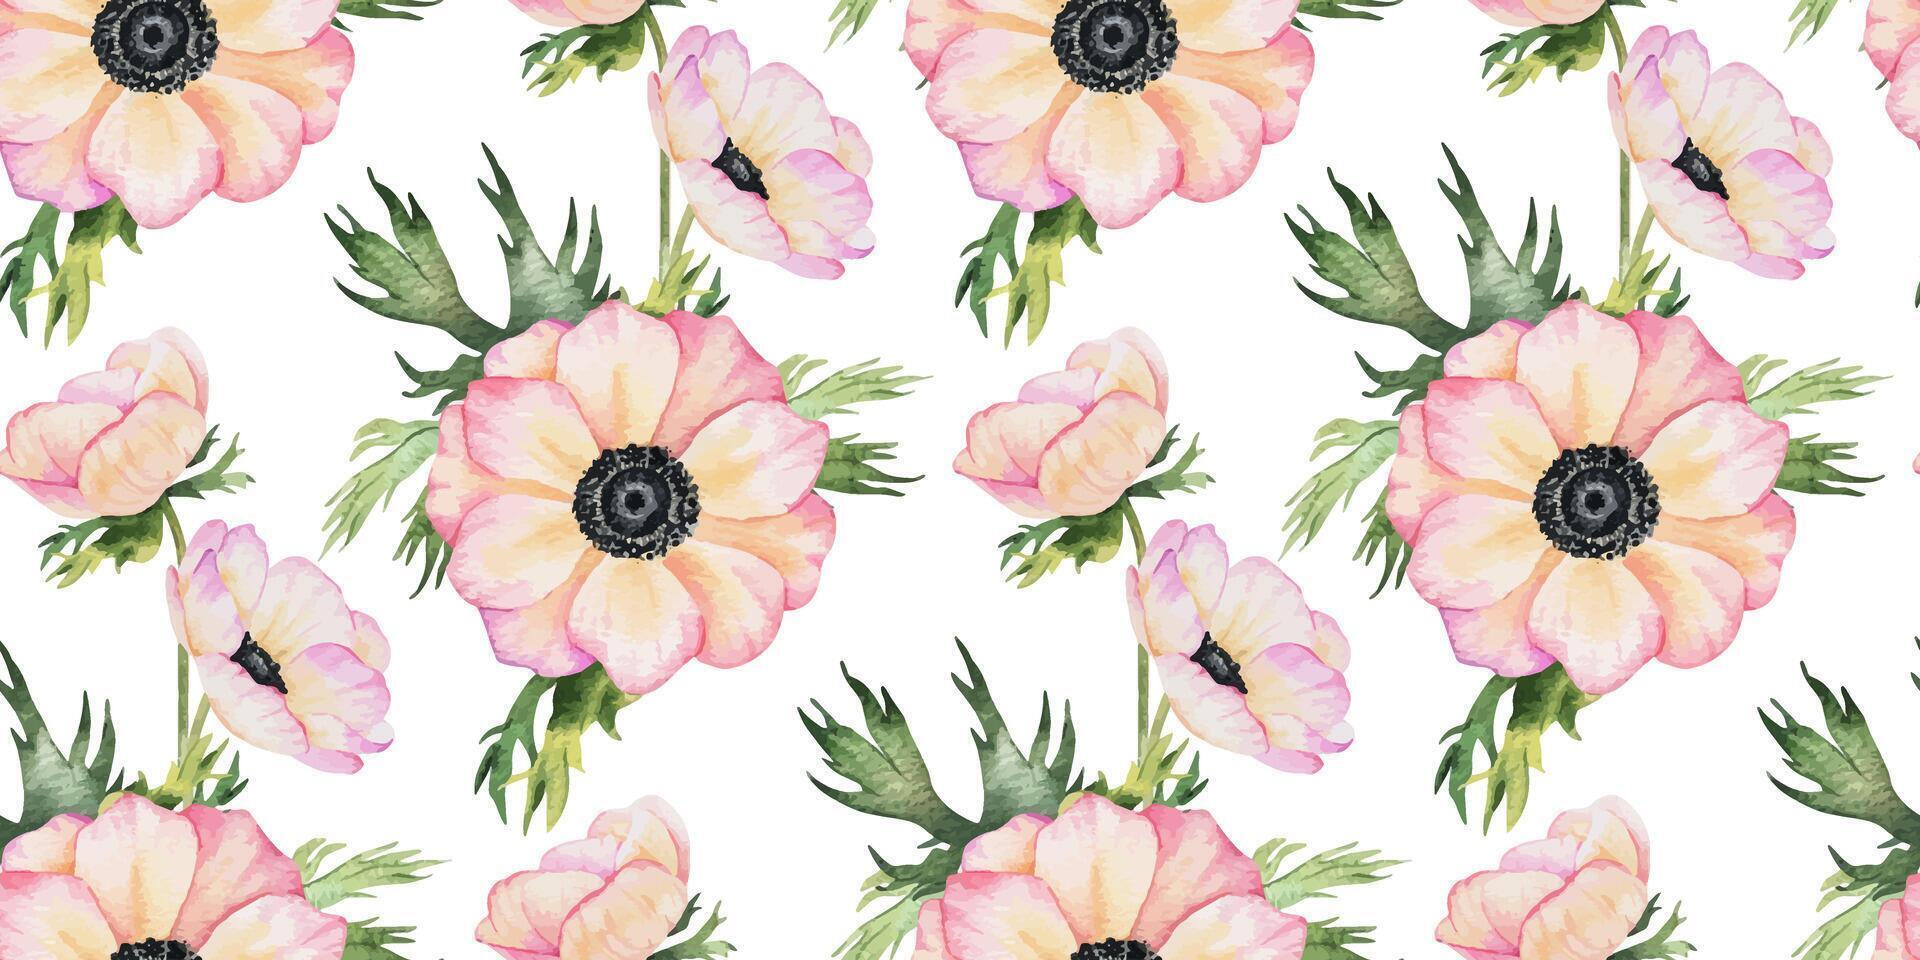 Anemone rose flowers and leaves. Isolated hand drawn watercolor seamless pattern of pink poppies. Summer floral background for wedding design, textiles, wrapping paper, scrapbooking vector